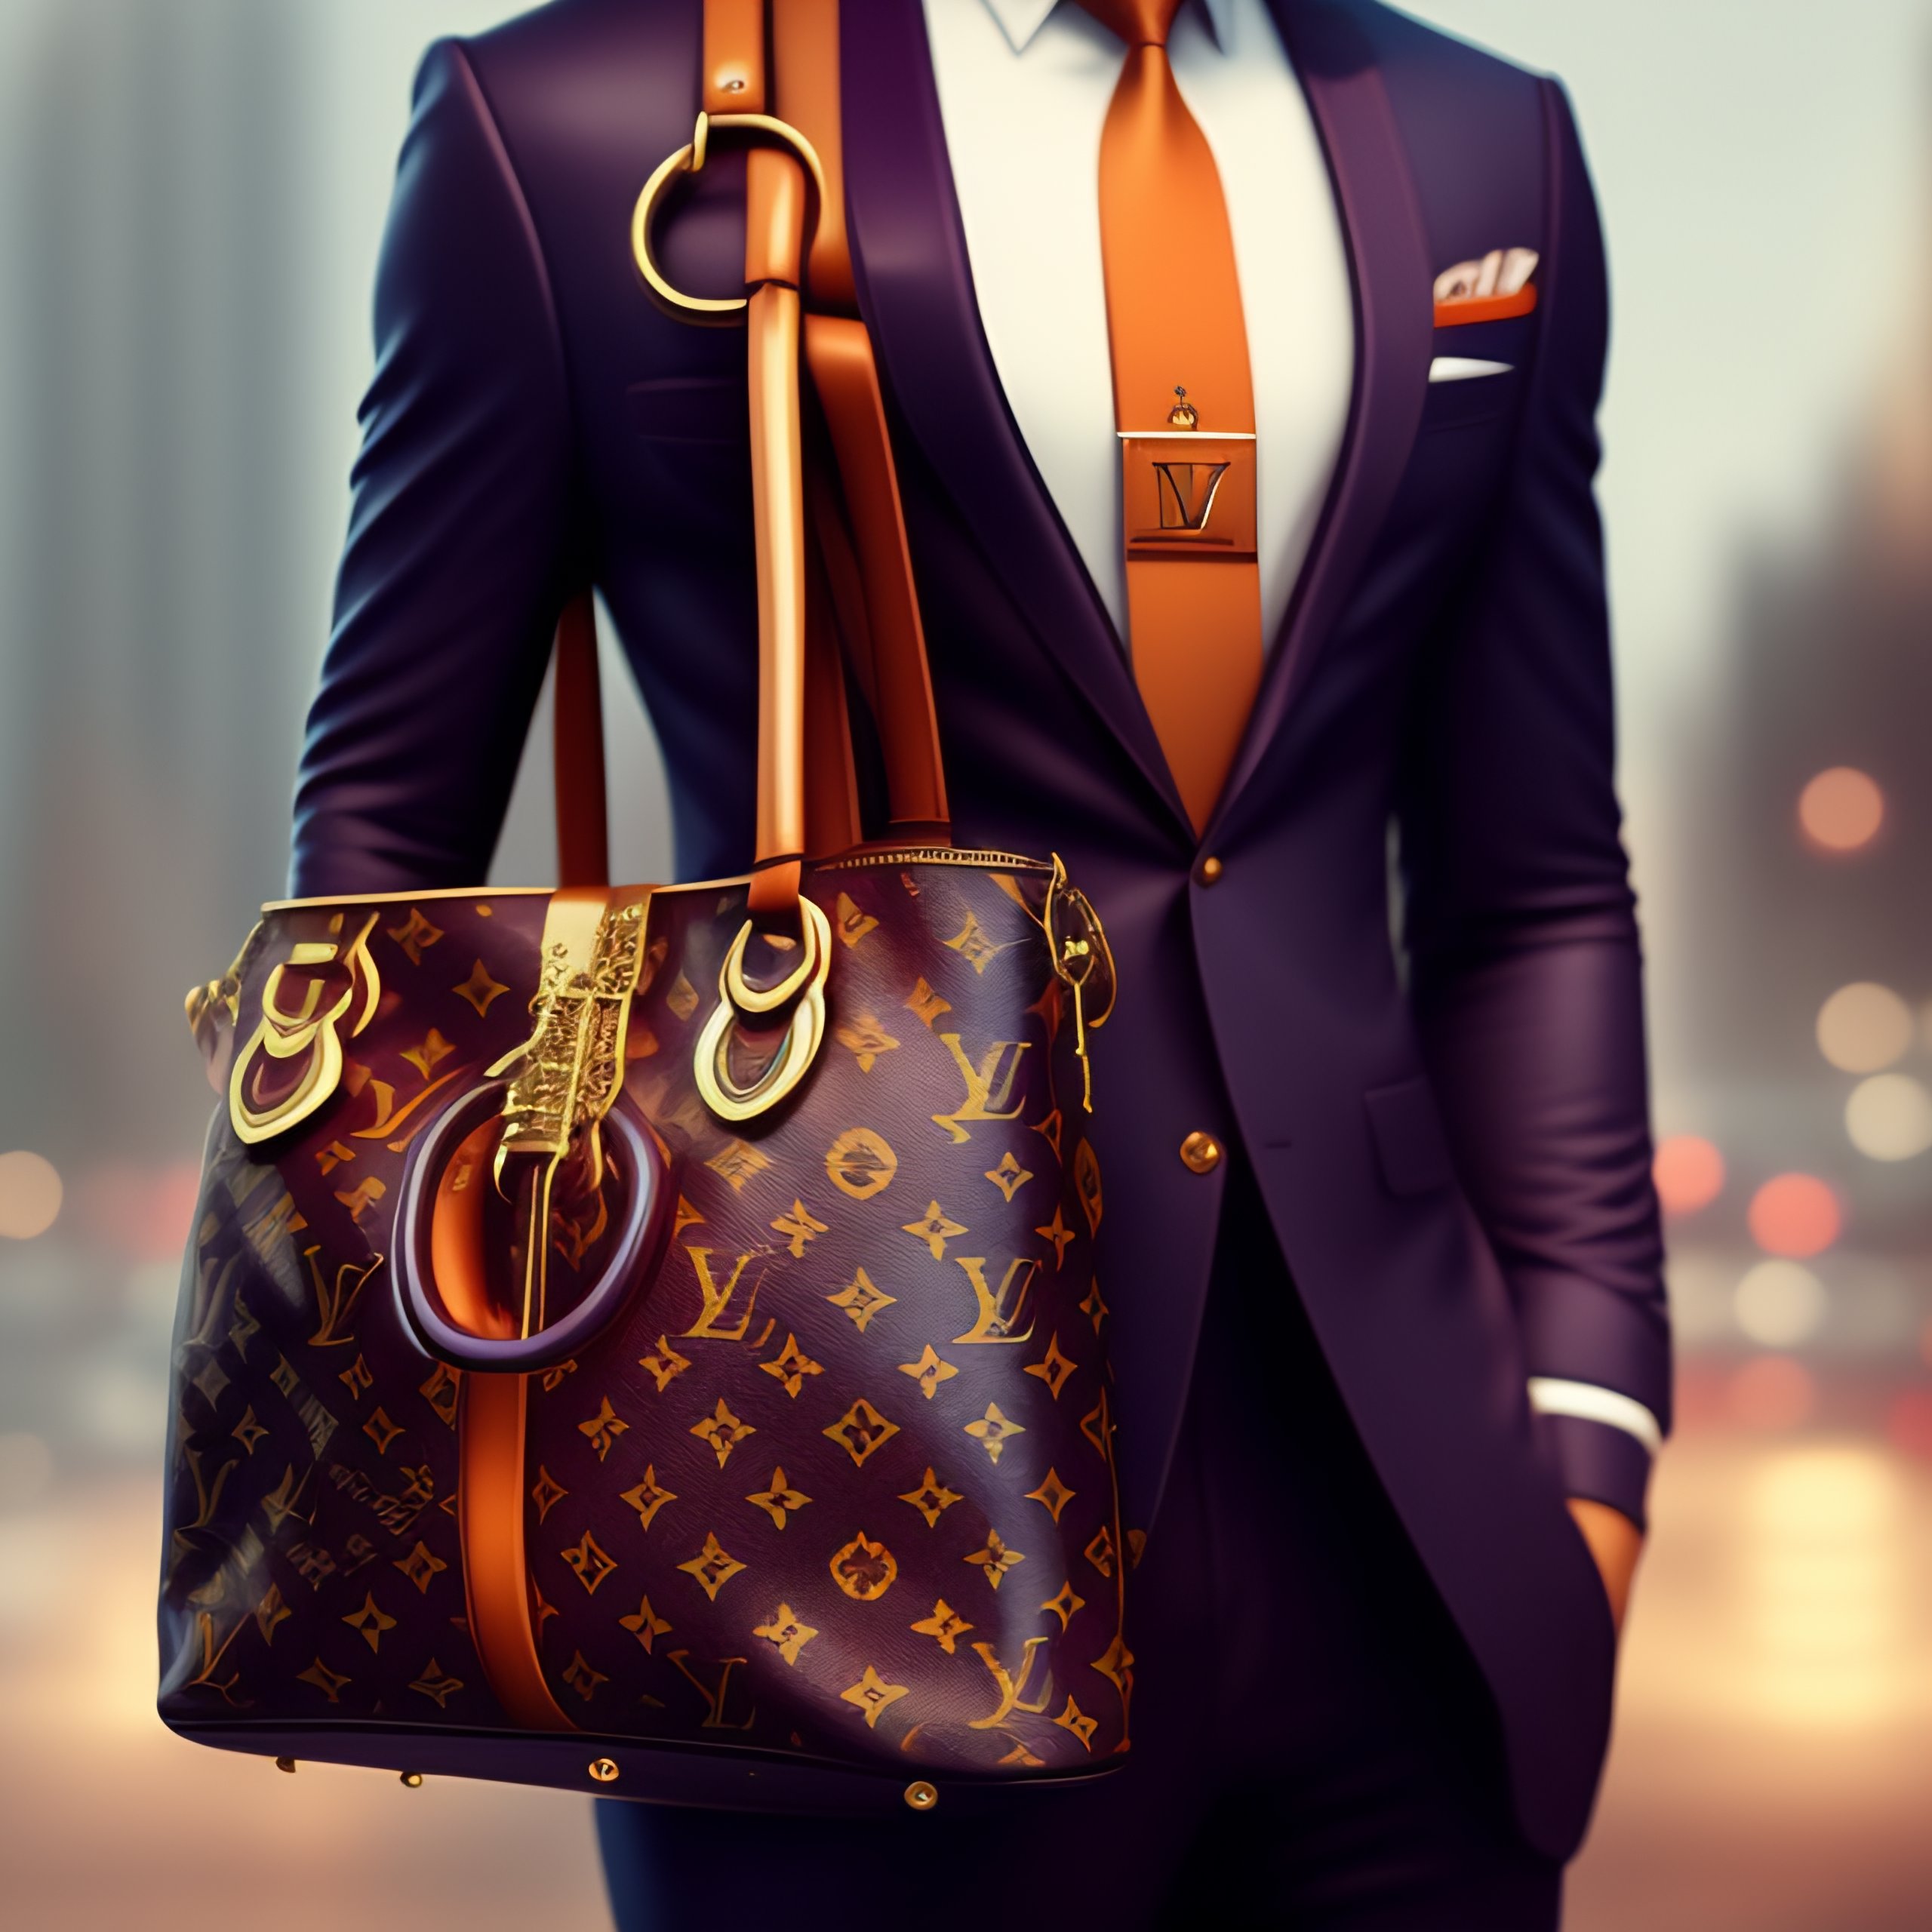 Lexica - A man with haute couture LV three piece suit, LV bag, mercedes key  chain laying on a beg character concept design, painting, detailed, vivid